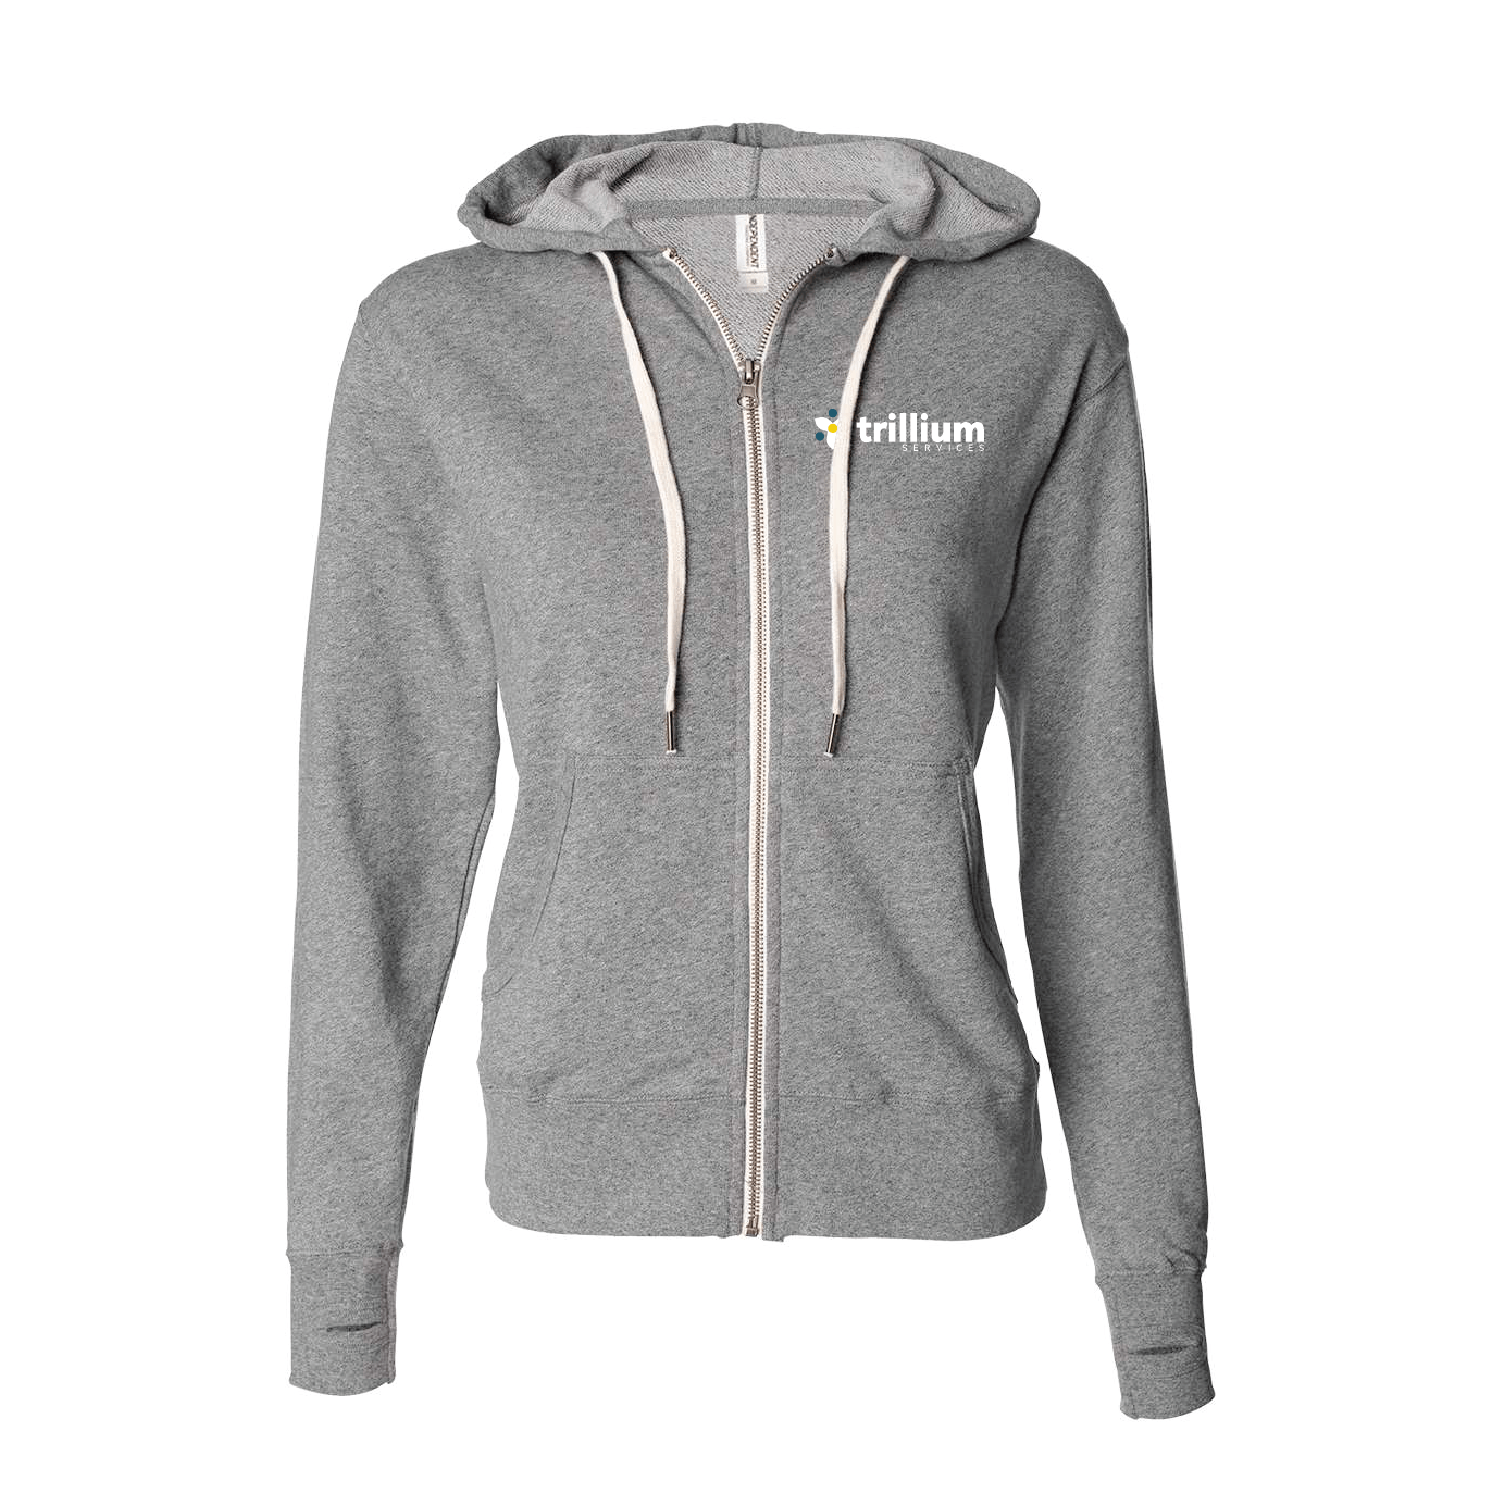 Trillium Services Unisex Heathered French Terry Full-Zip Hooded Sweatshirt - DSP On Demand